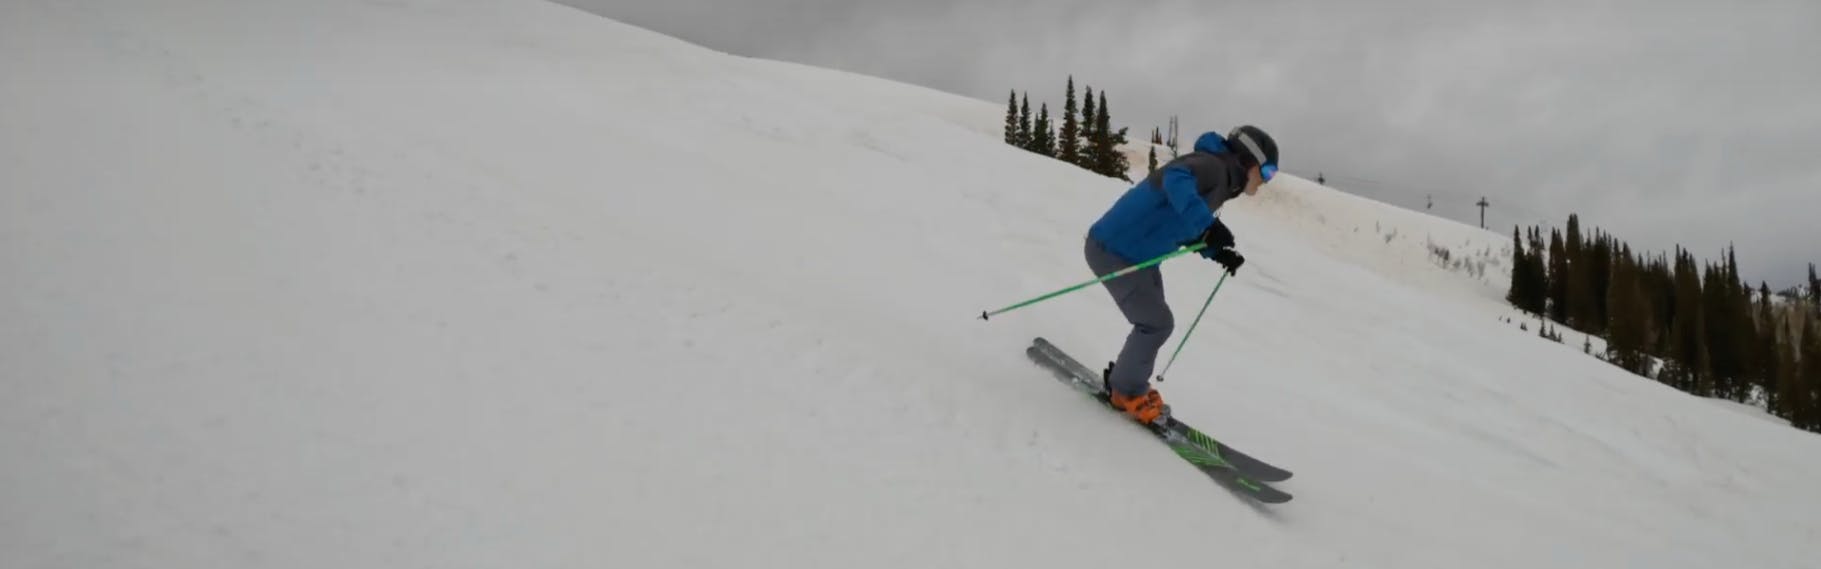 Curated Ski Expert Rob G. on the 2023 Line Blade Optic 96 skis on a steep run